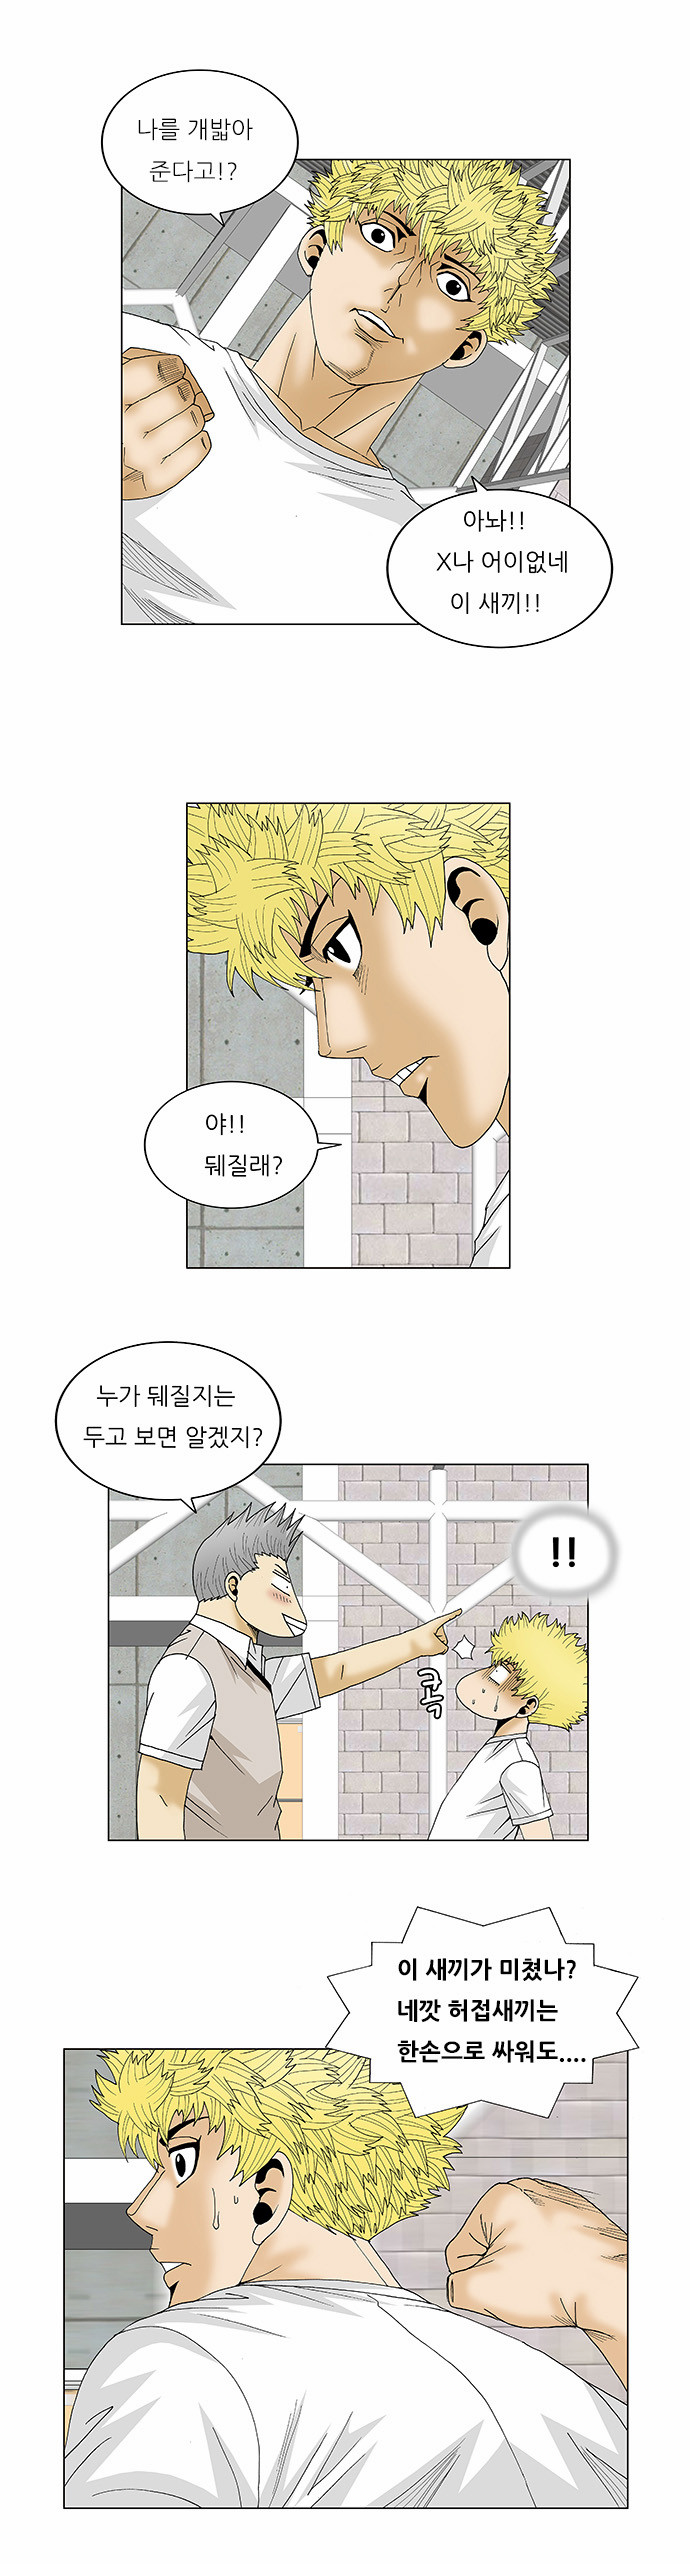 Ultimate Legend - Kang Hae Hyo - Chapter 110 - Page 7